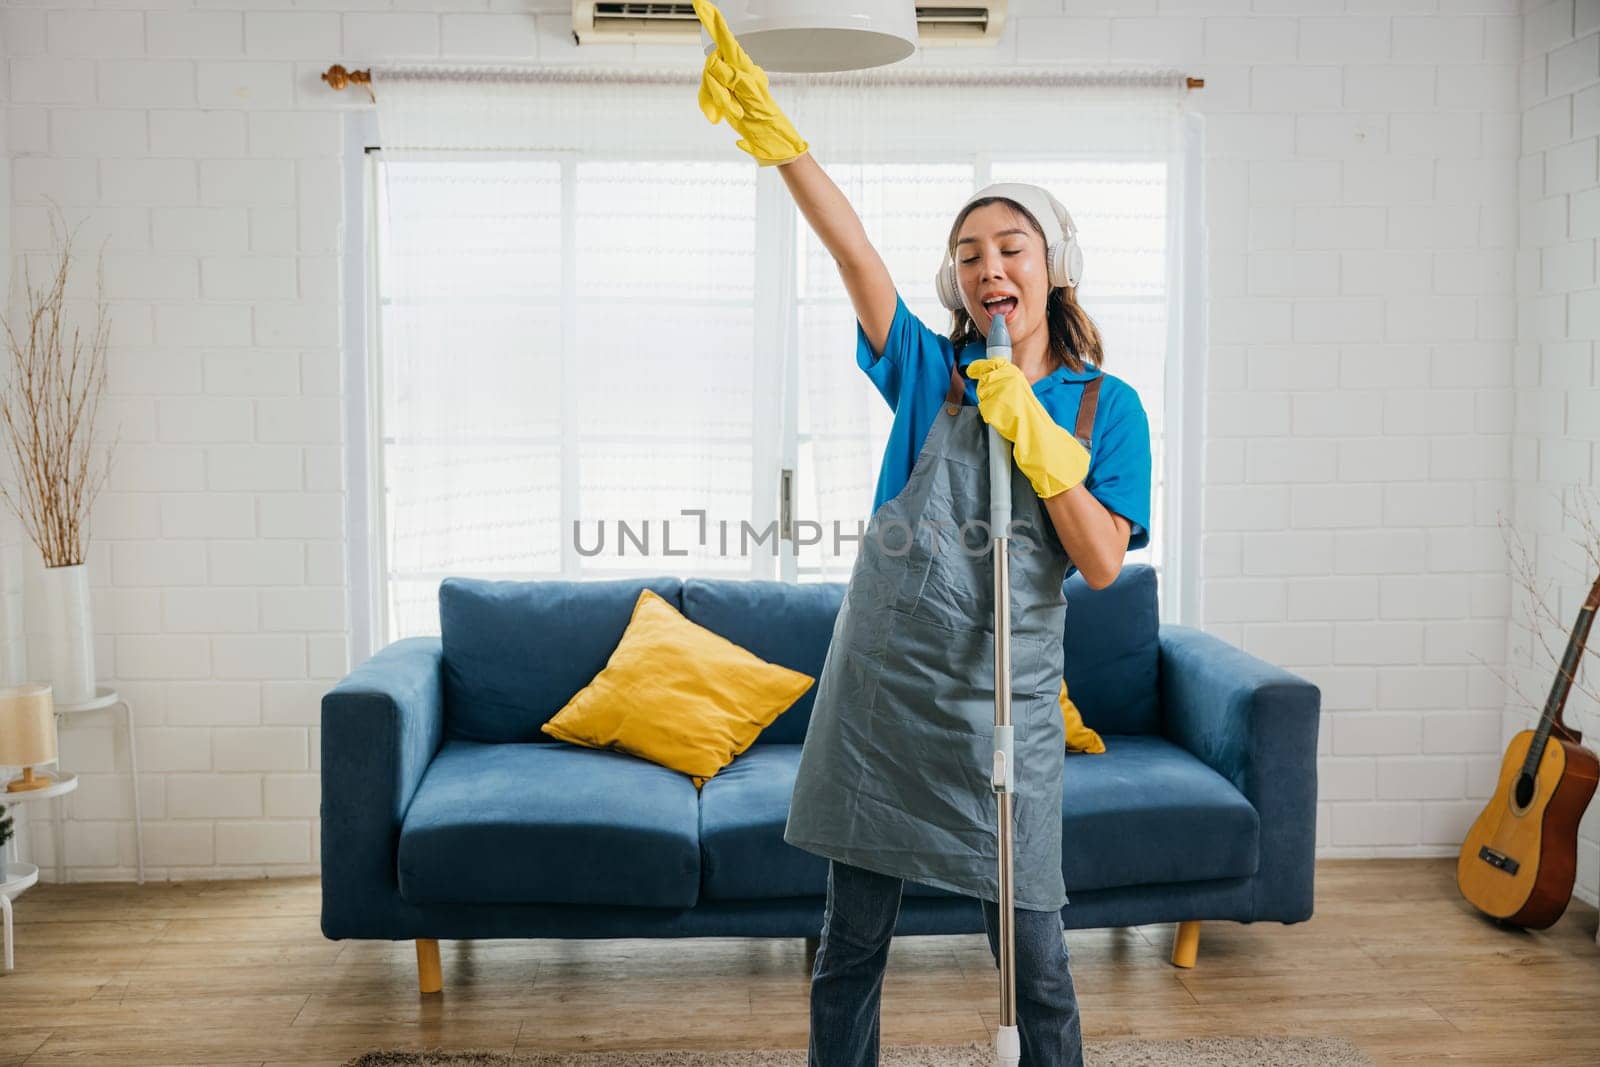 House cleaning turns joyful housewife sings happily while using mop microphone during cleanup. Enjoying domestic chores dancing and cleaning in living room. Cheerful housewife singing playing with mop by Sorapop